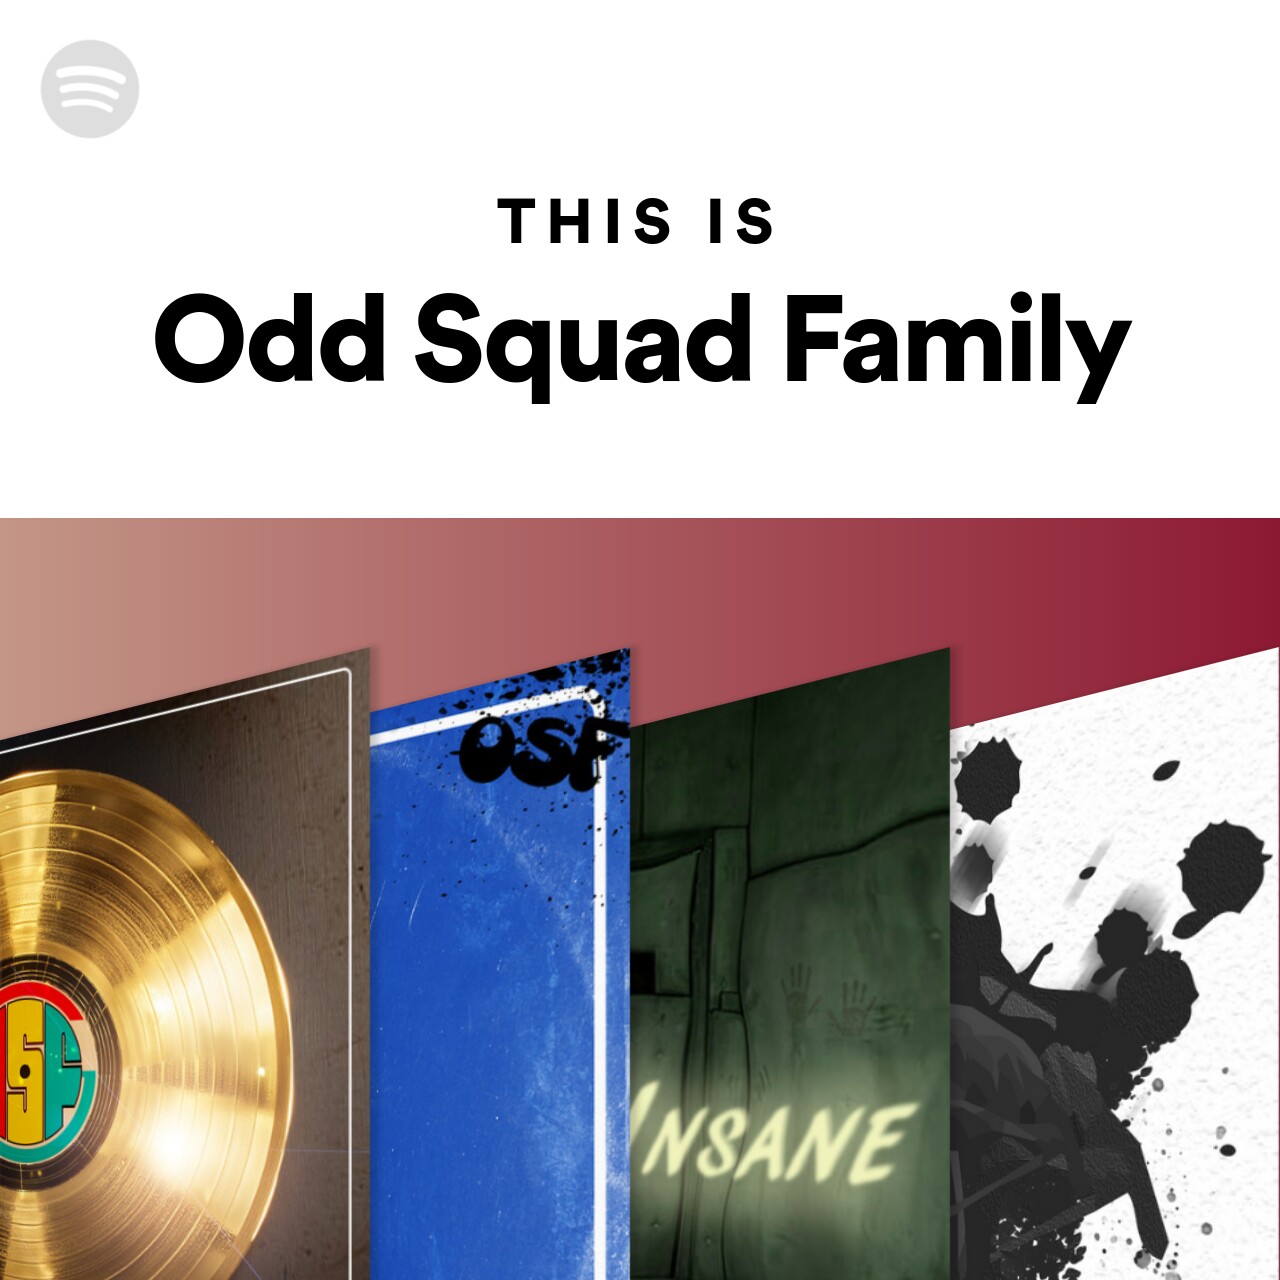 This Is Odd Squad Family